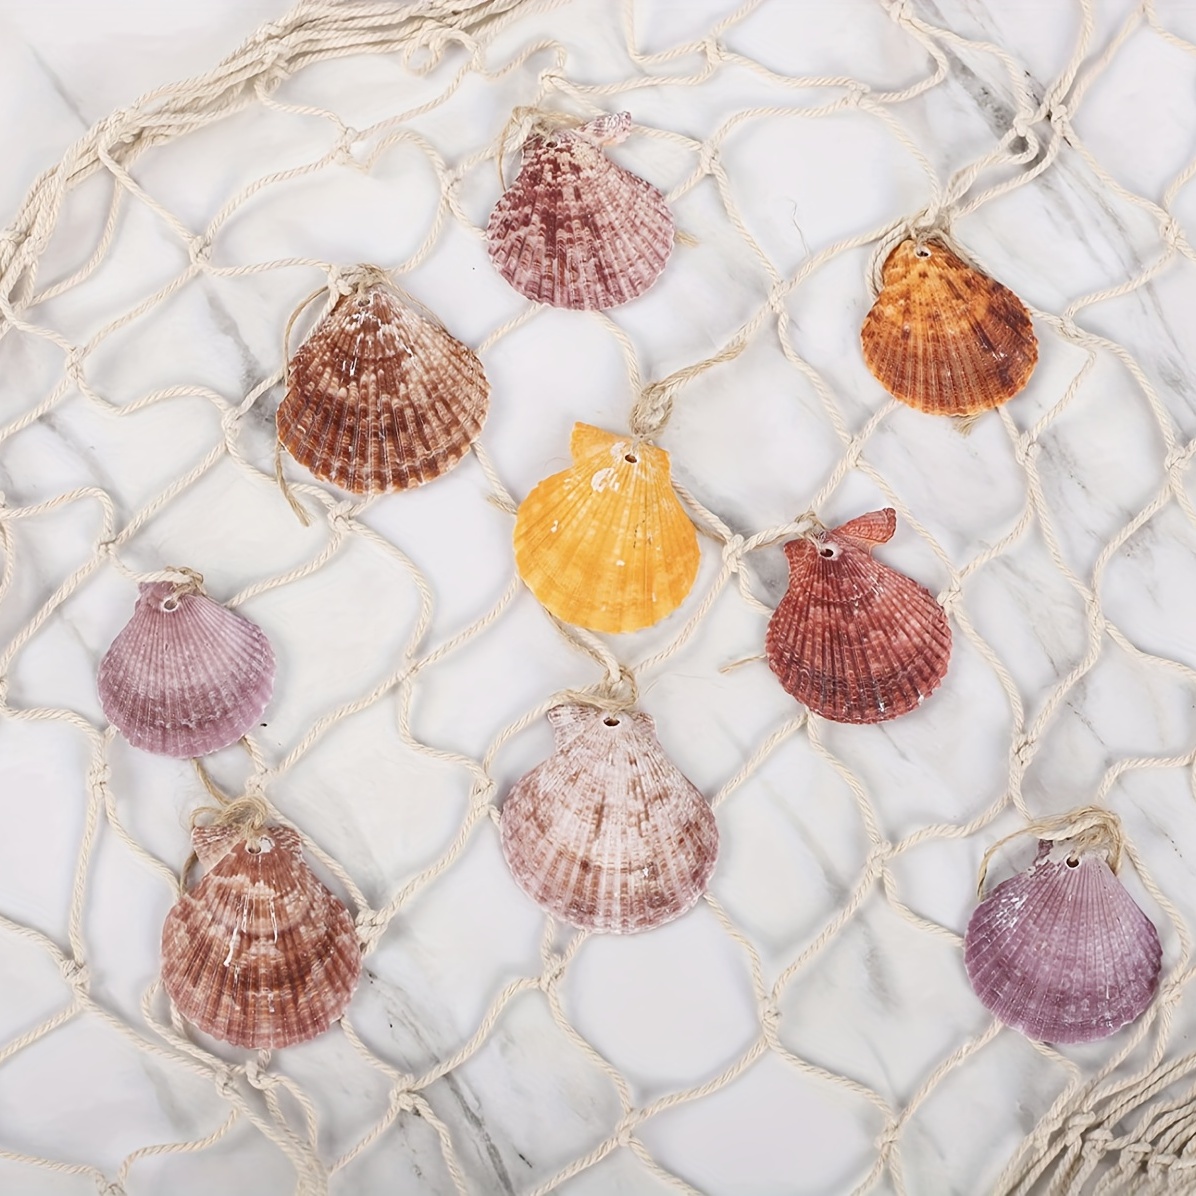 1pc Ocean Themed Decorative Fishing Net With Shells, Rope Door Hanging For  Home Wall Decoration, Mermaid Birthday Party Supplies